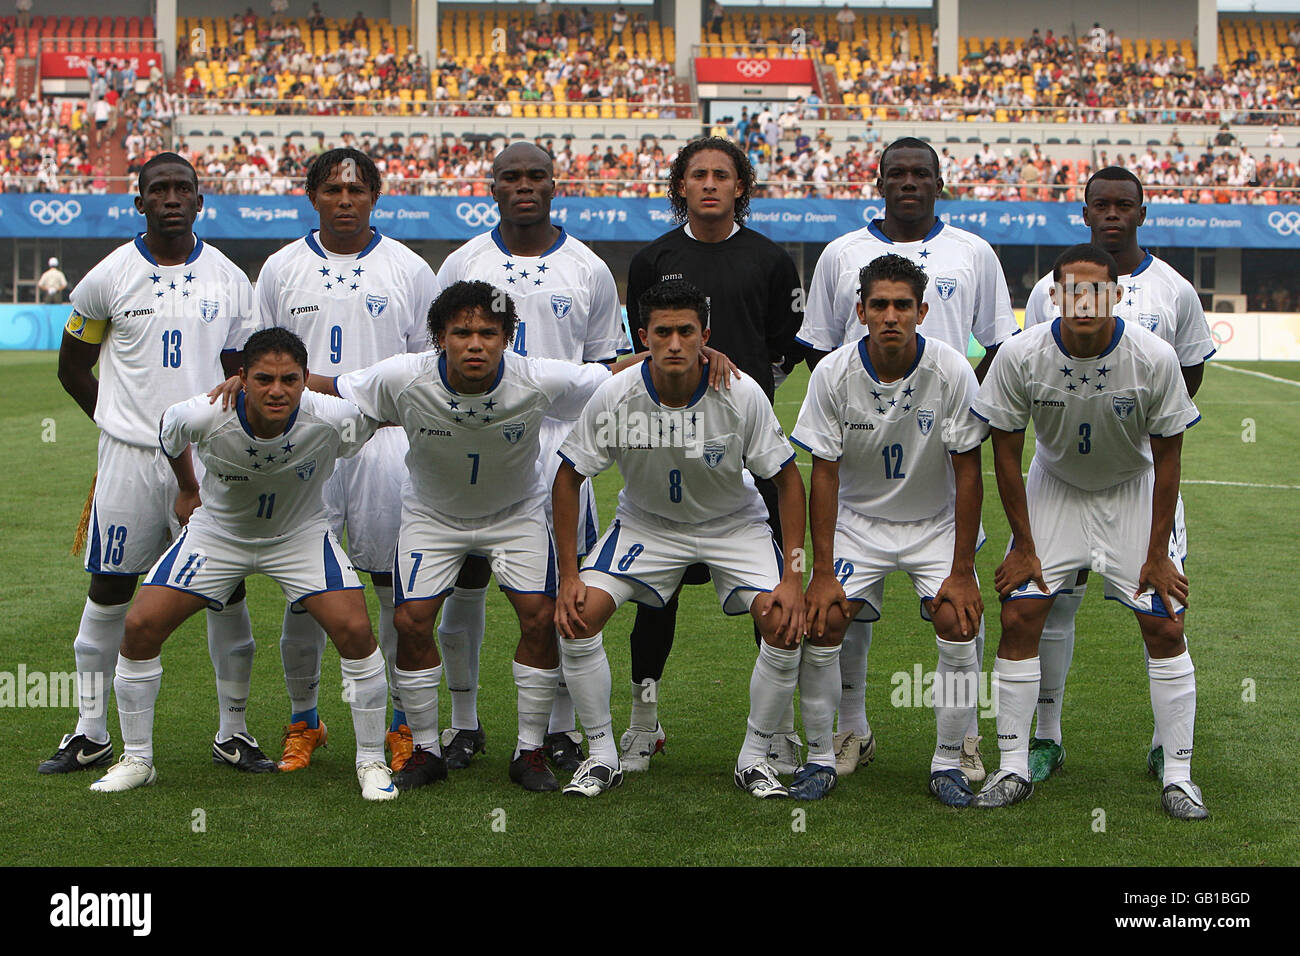 Honduras' team photo before their game against Italy at the Olympic Sports Centre Stadium, Qinhuangdao, China Stock Photo